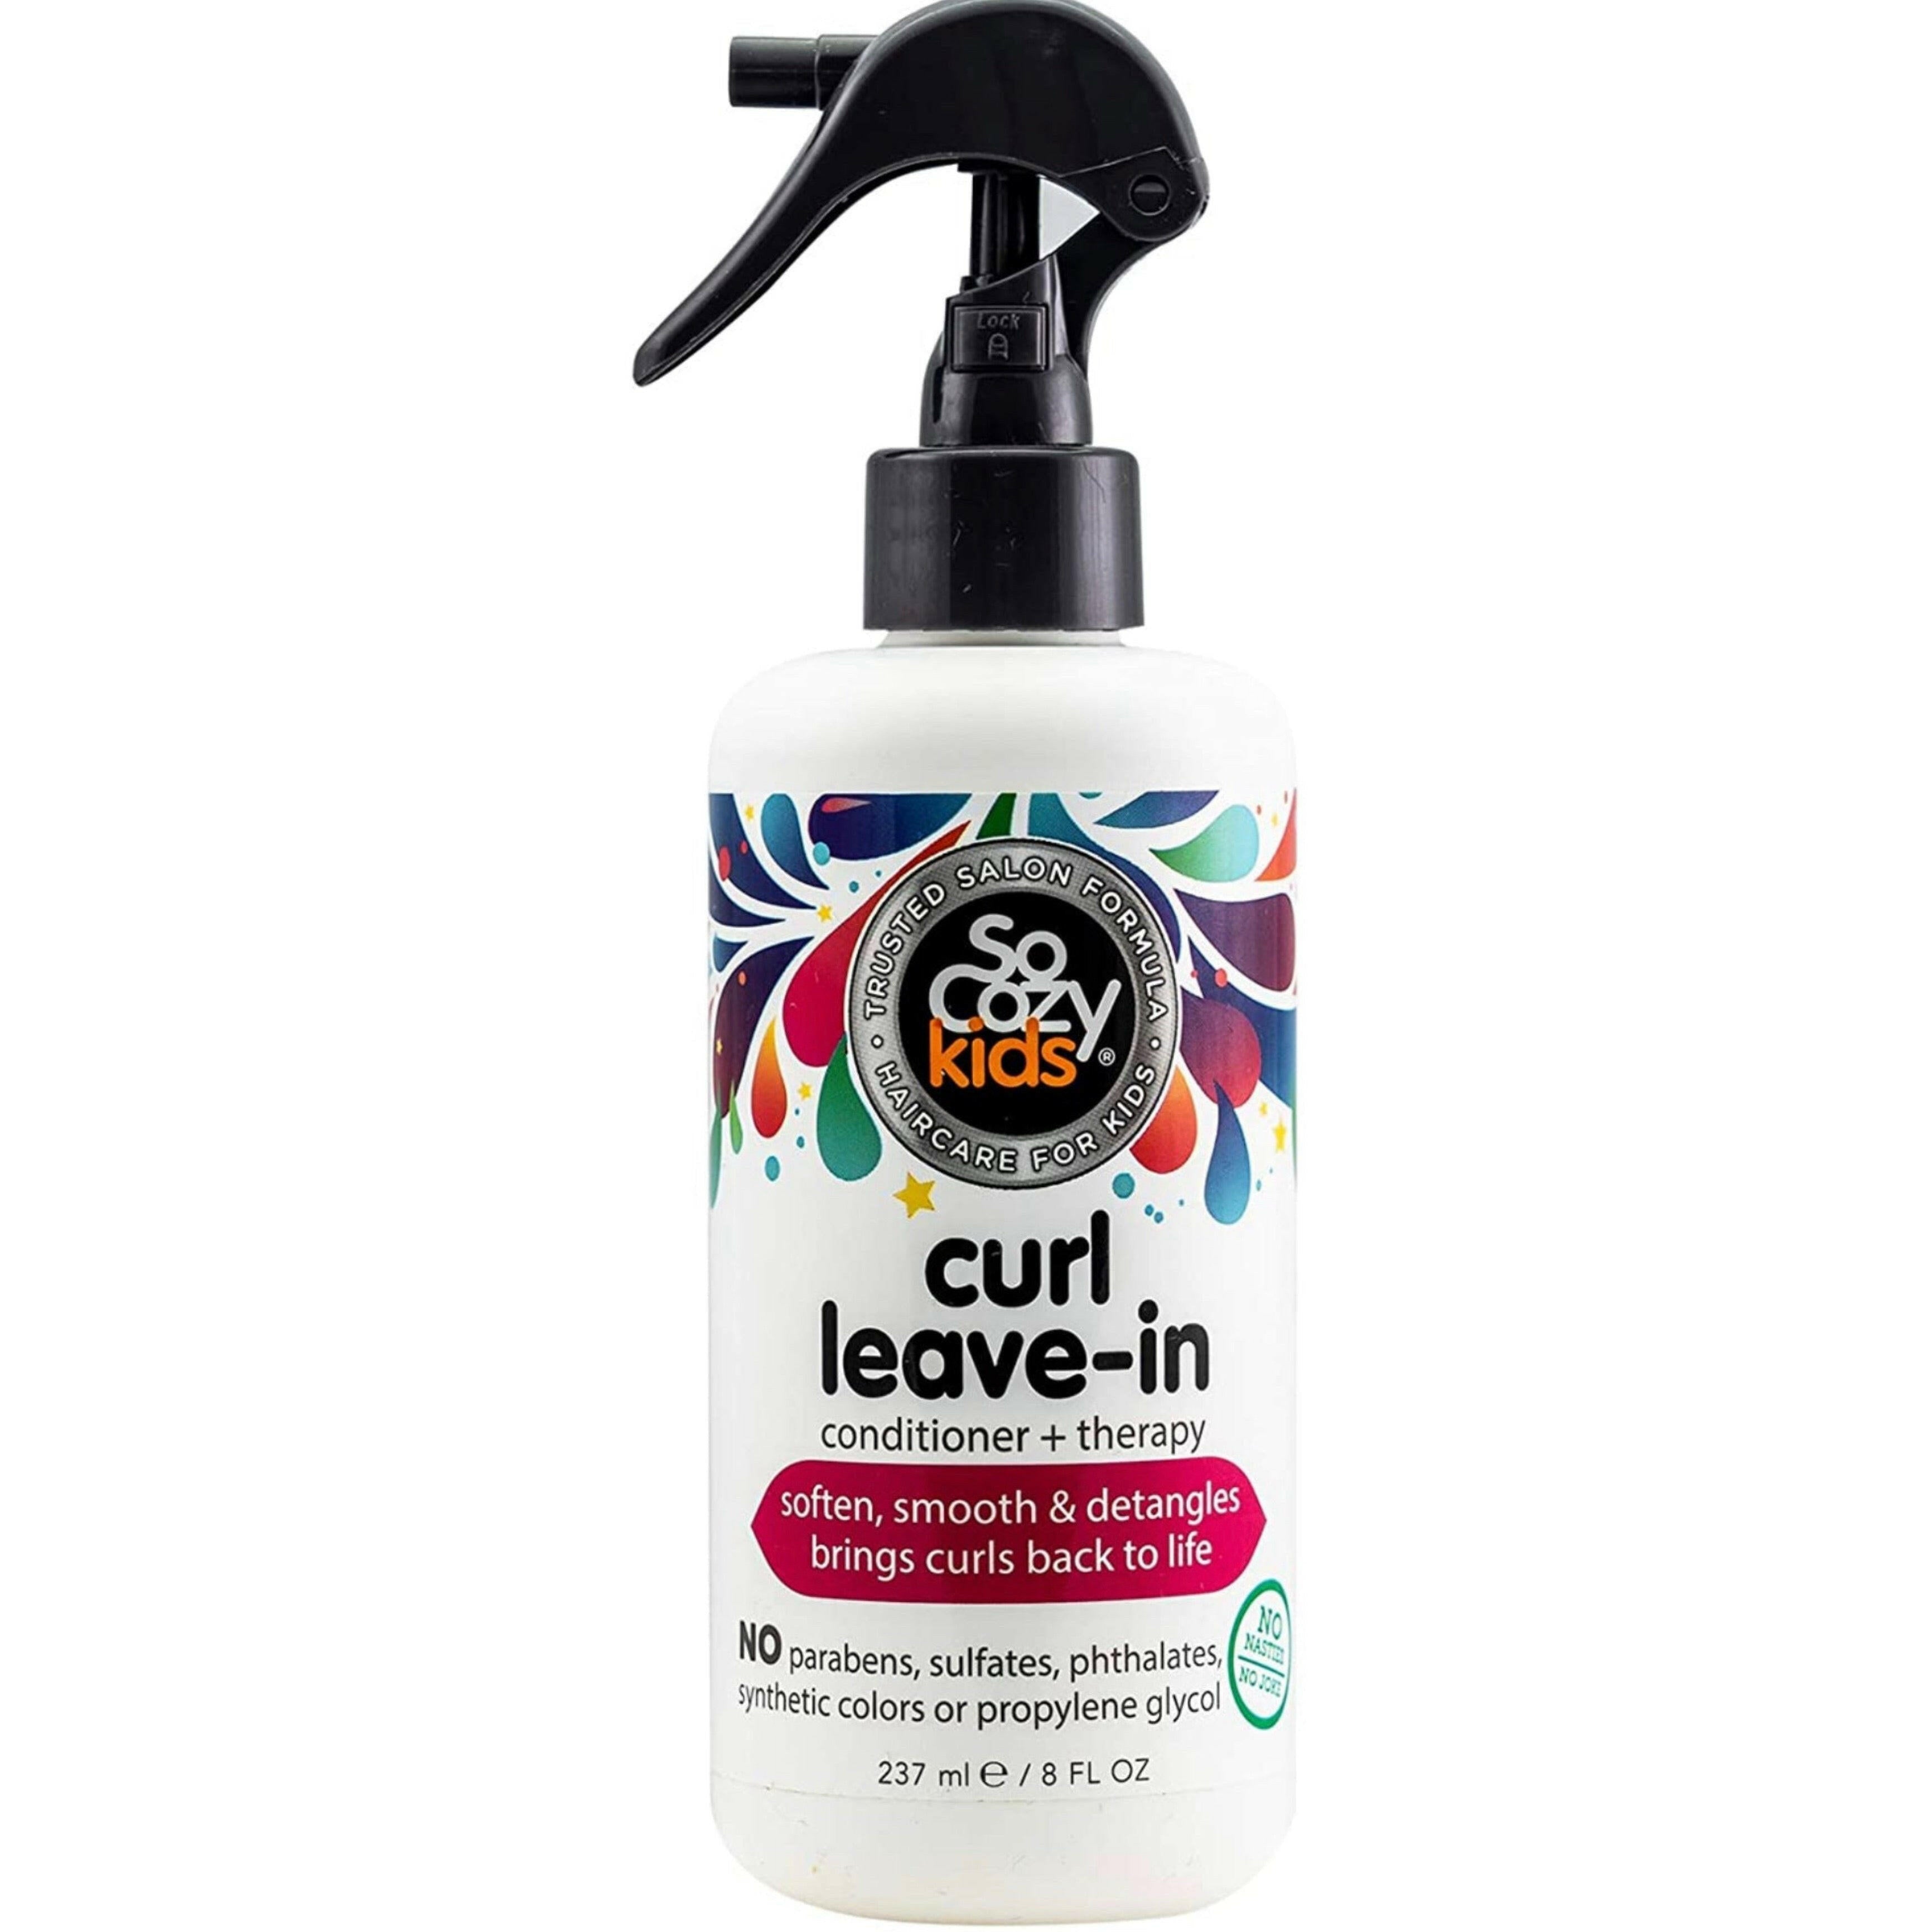 SoCozy, Curl Spray LeaveIn Conditioner For Kids Hair Detangles and Restores Curls No Parabens Sulfates Synthetic Colors or Dyes, Jojoba Oil,Olive Oil & Vitamin B5, Sweet-Pea, 8 Fl Oz.